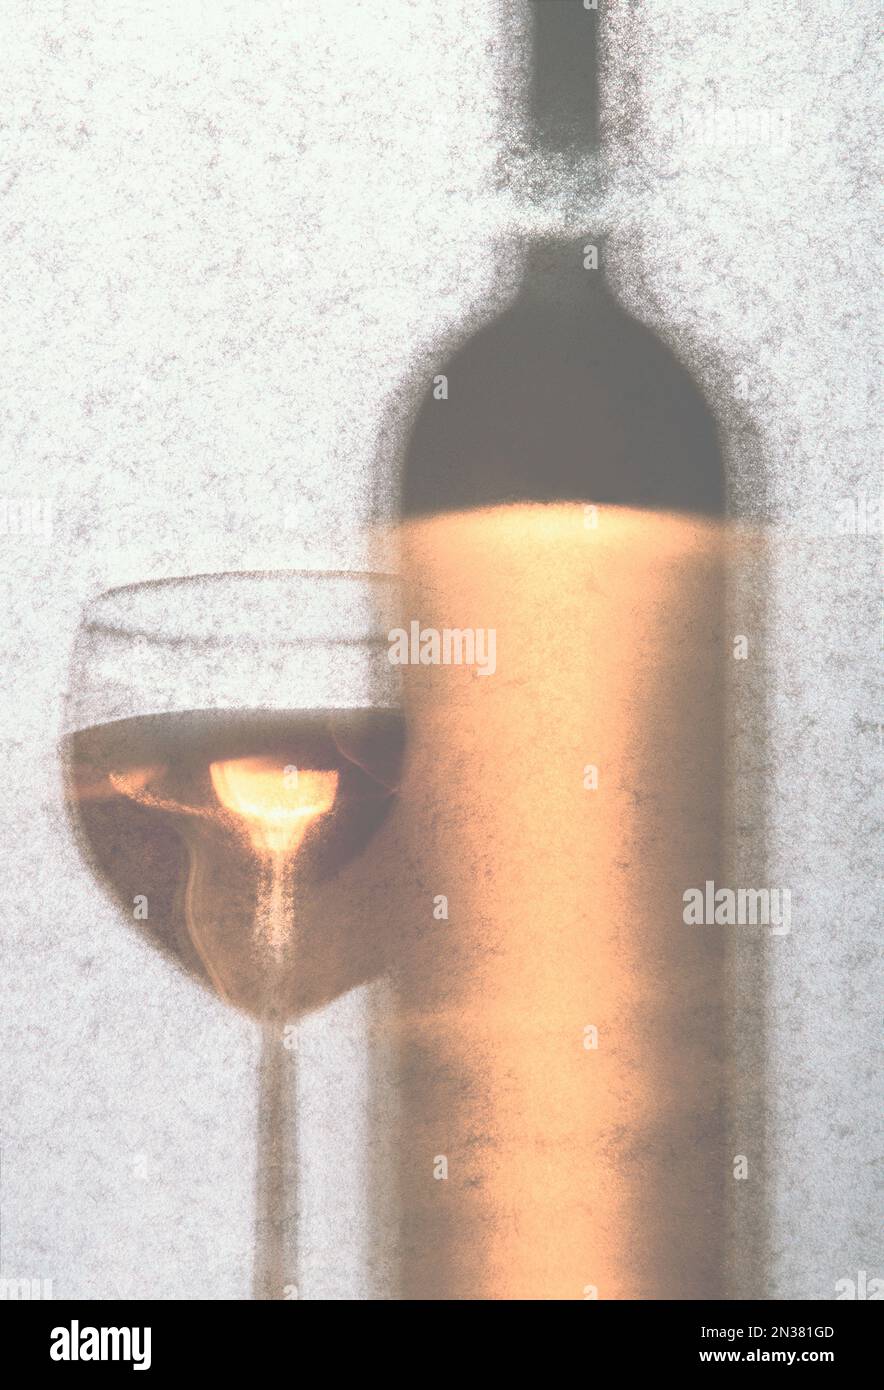 Bottle and Glass of Wine Stock Photo